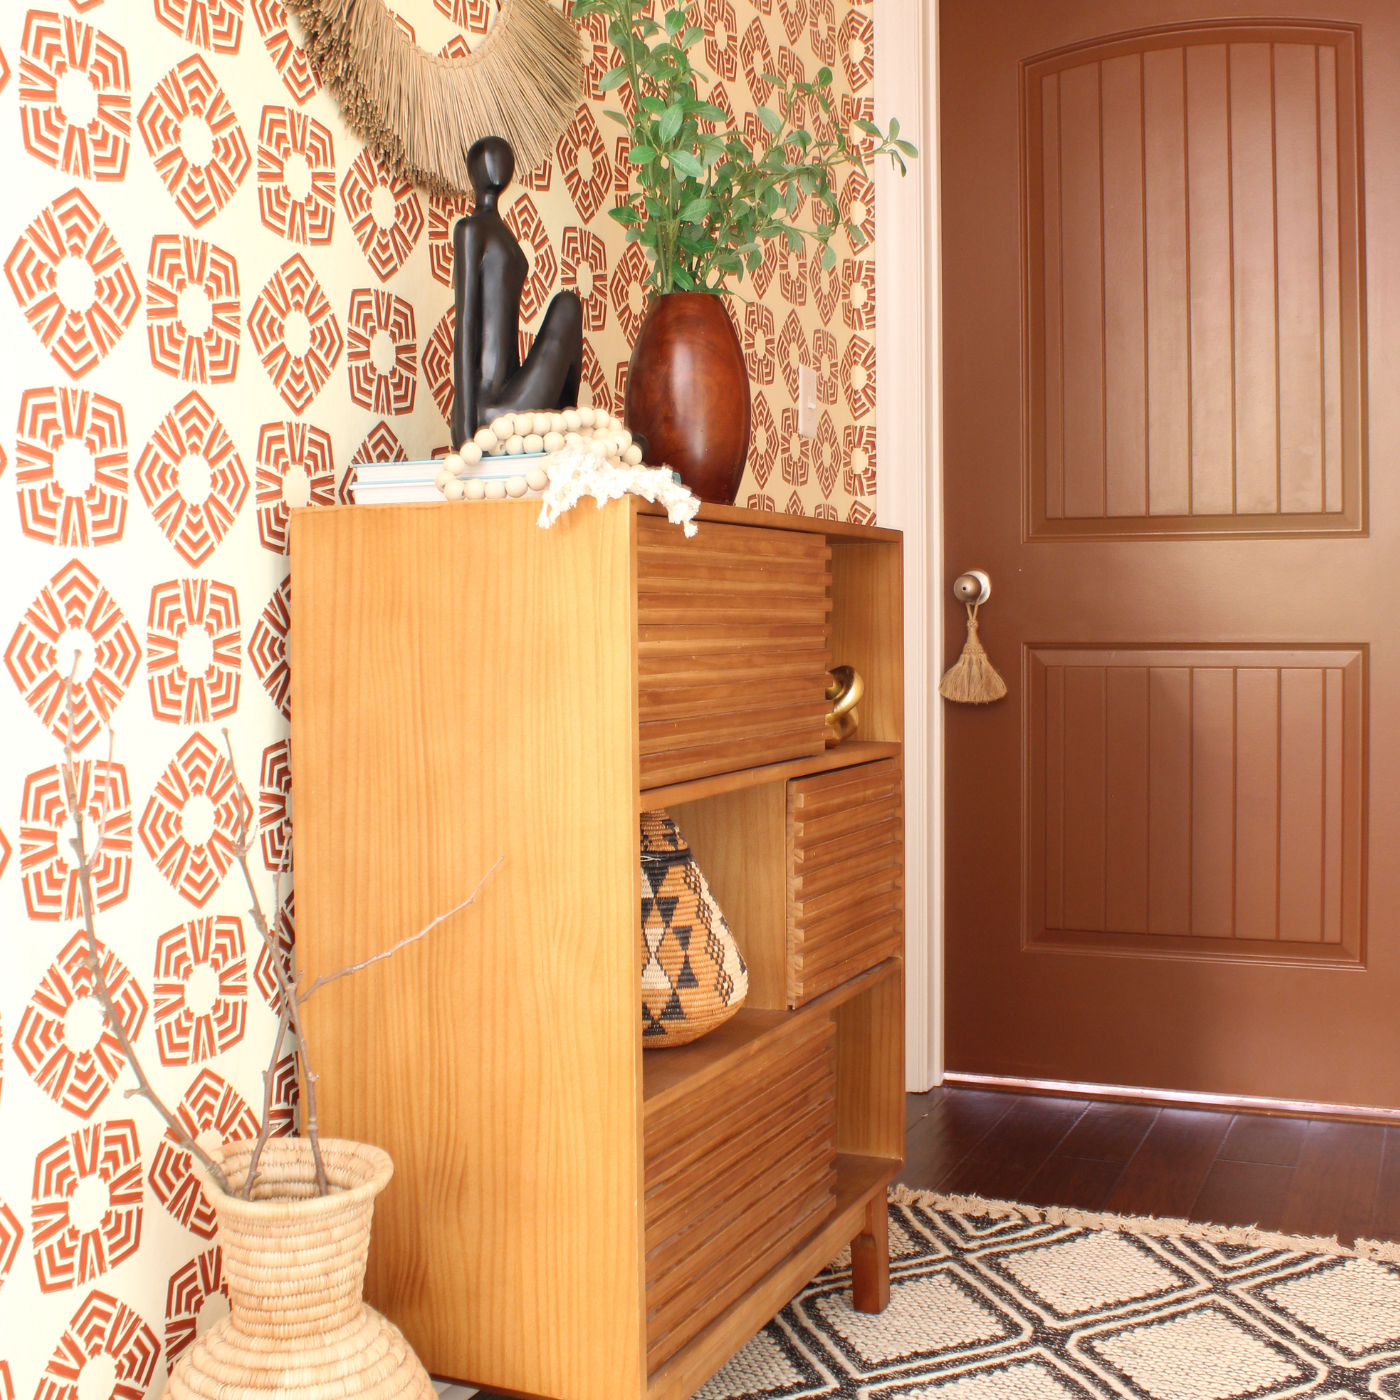 Image of a corner of a room with a brown wooden bookshelf with plants and a sculpture on top. A cream rug with brown geometric shapes is in front of the bookshelf. A wallpaper design with a cream background and repeating rows of large light brown squares is on the wall behind the bookshelf.